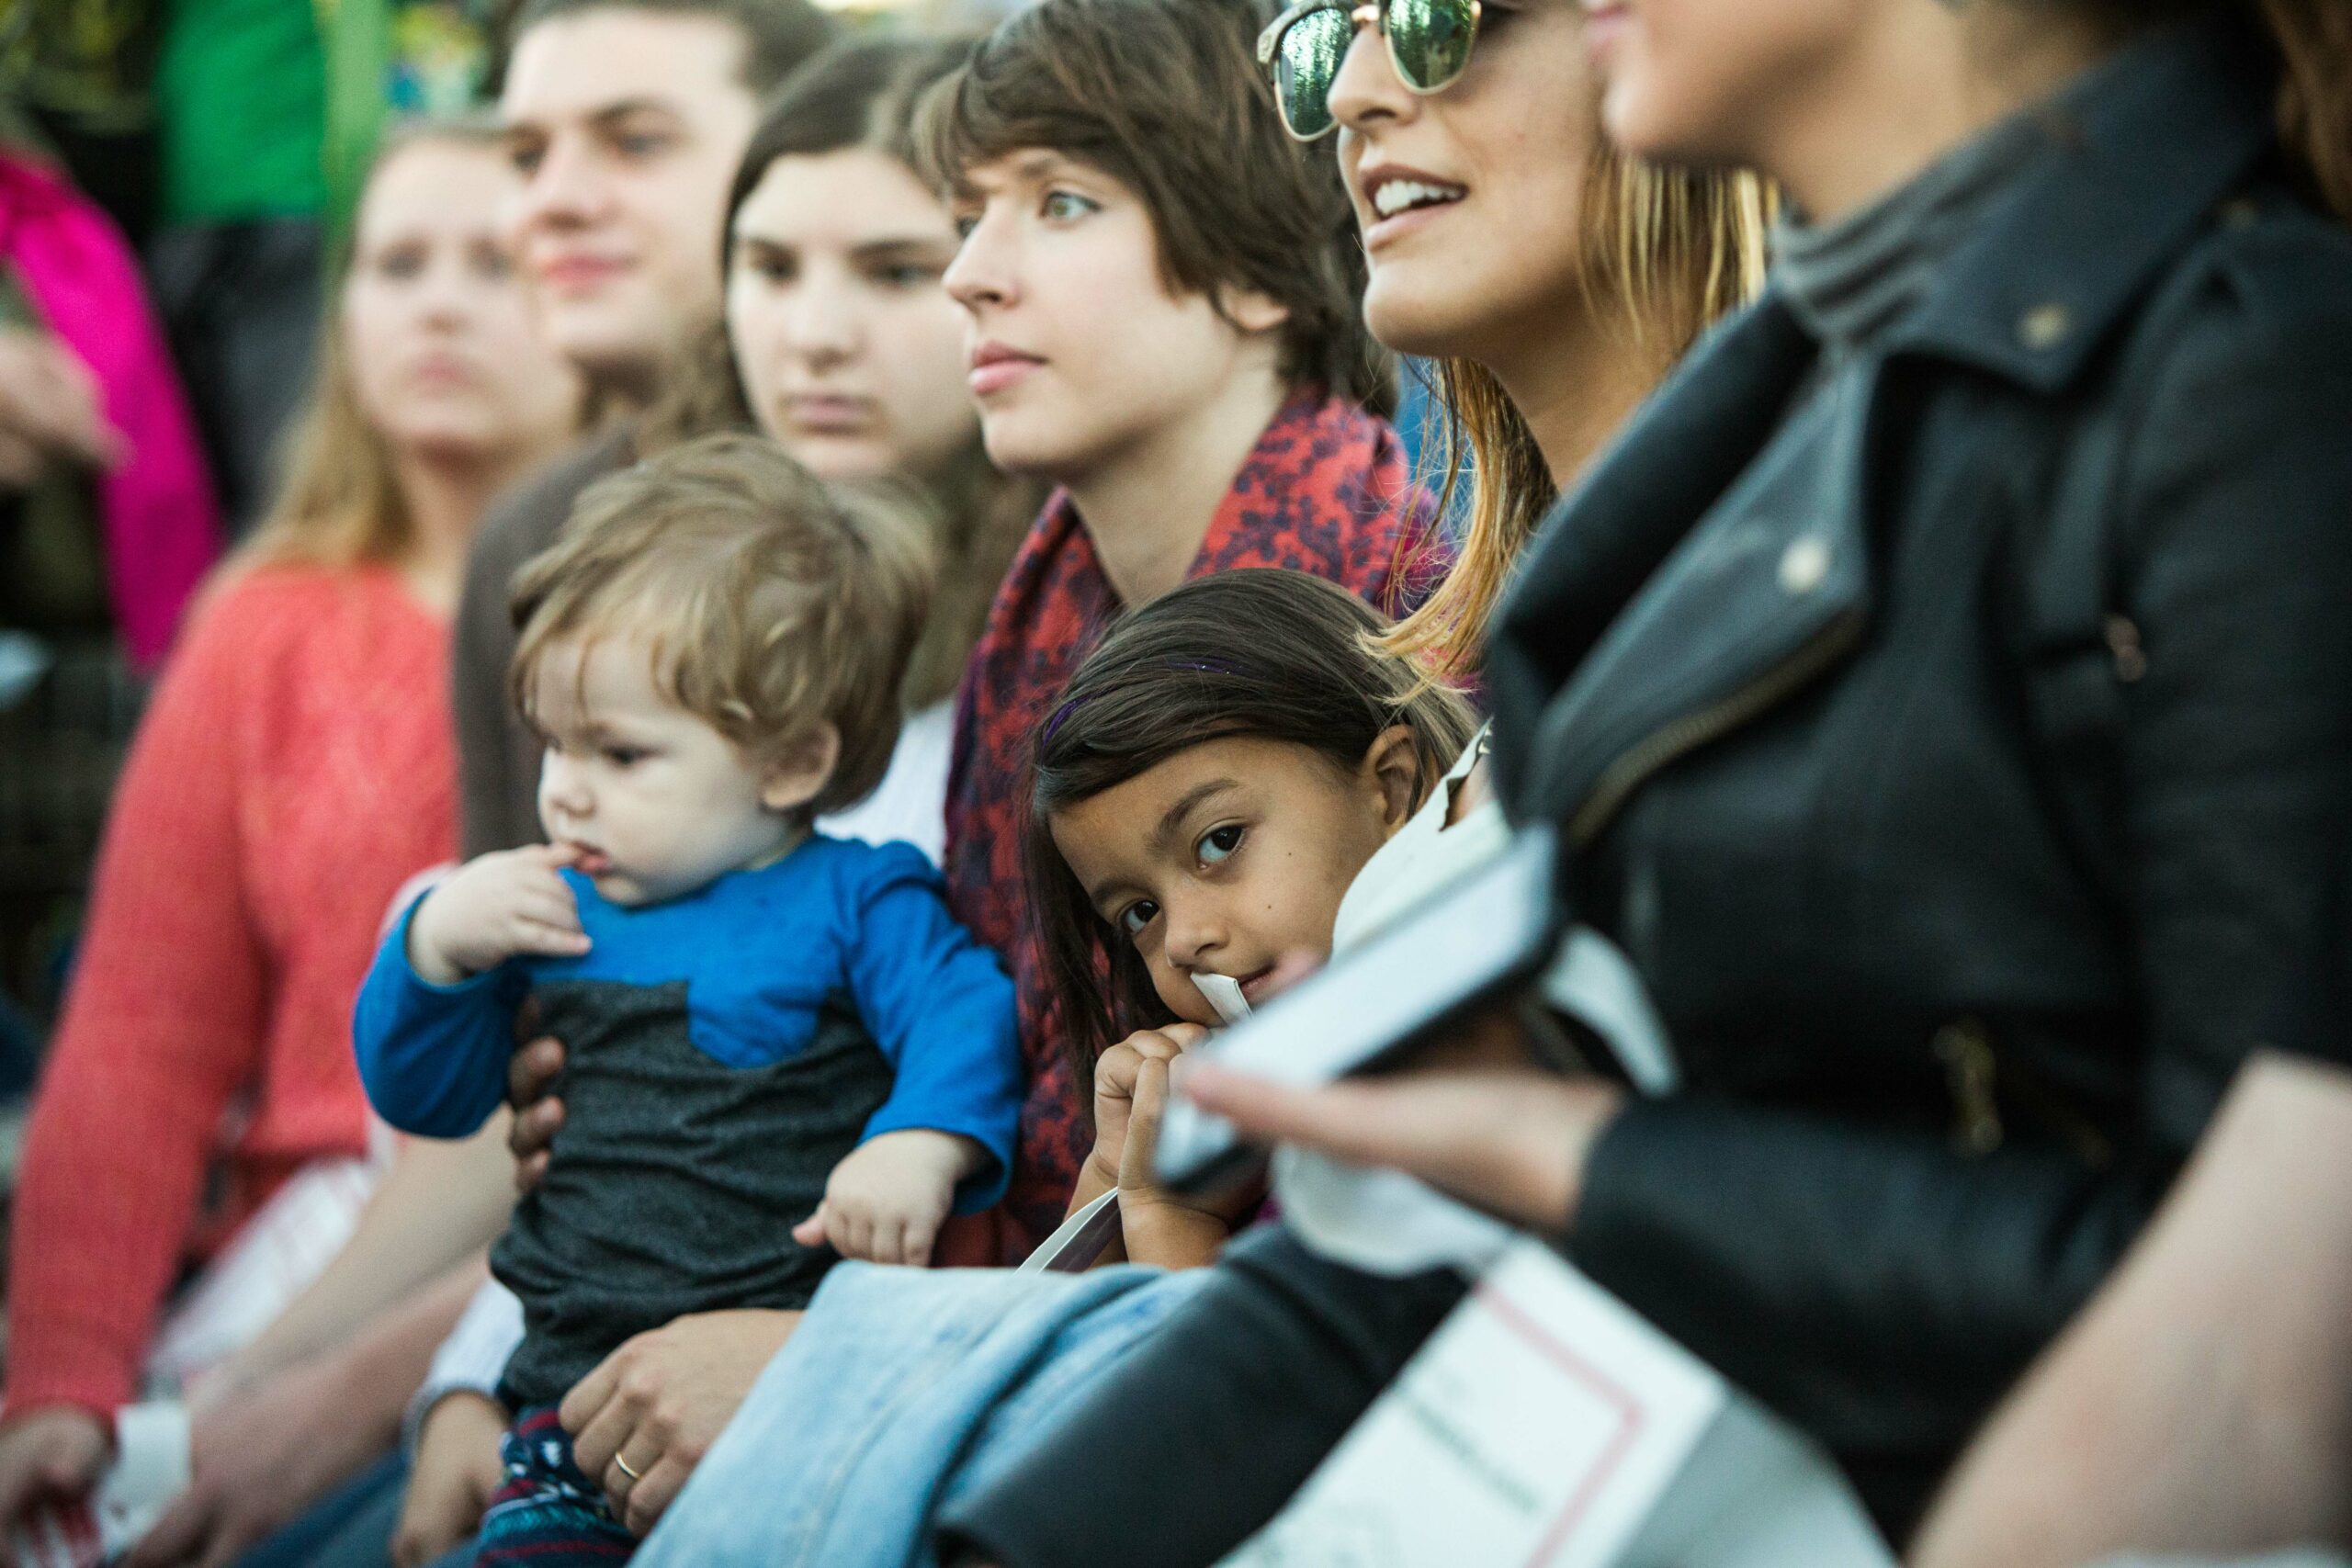 A diverse group of individuals is attentively watching an event, including a child on one person's lap.